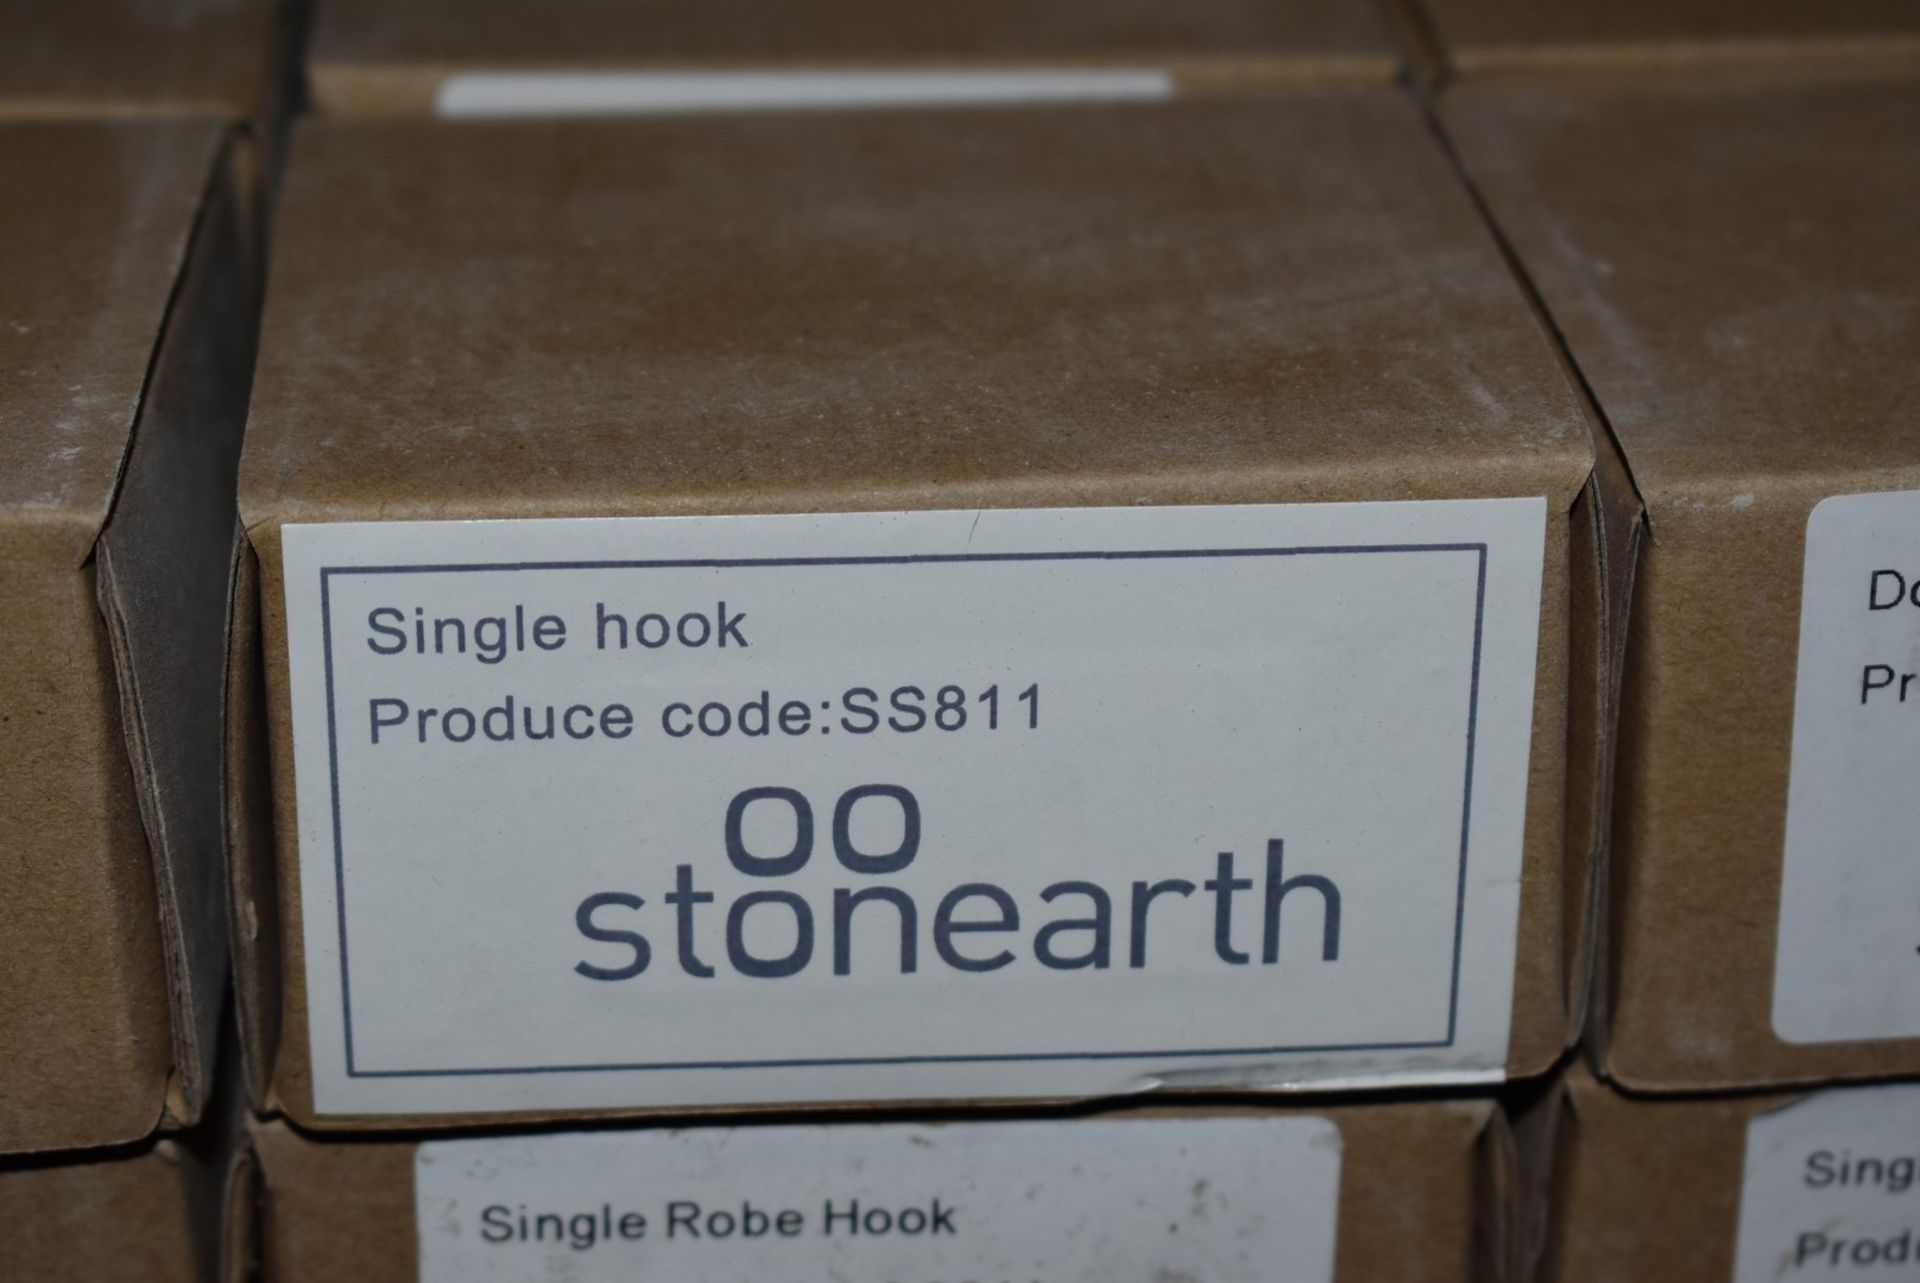 1 x Stonearth Single Robe Hook - Solid Stainless Steel Bathroom Accessory - Brand New & Boxed - - Image 2 of 3